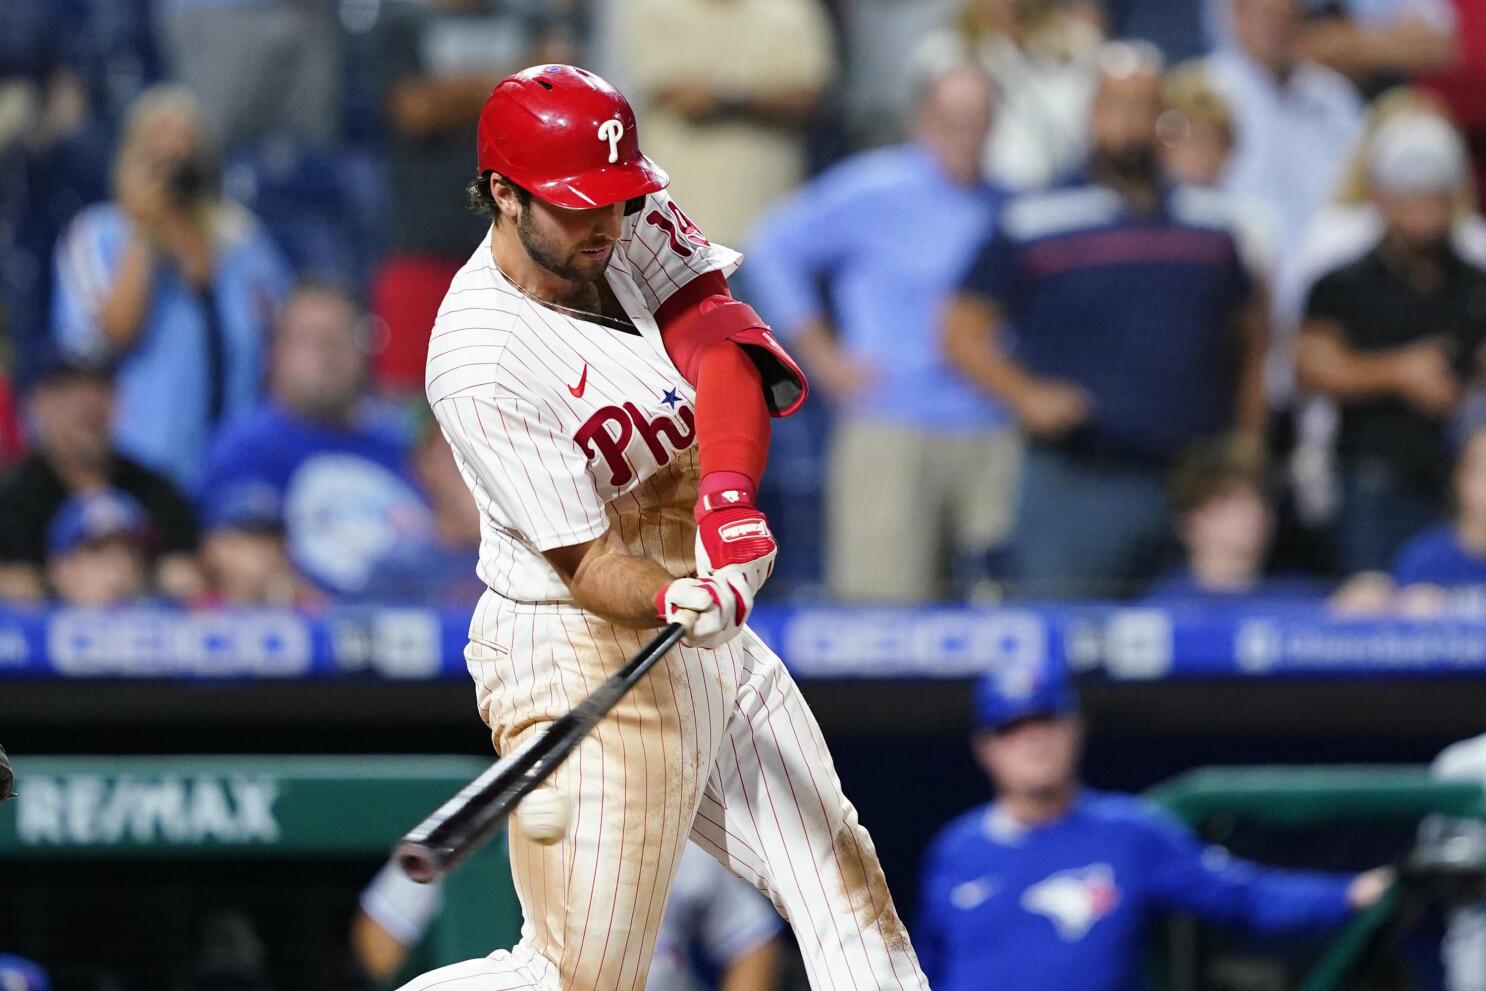 Phillies can't finish rally, fall to Blue Jays in 10